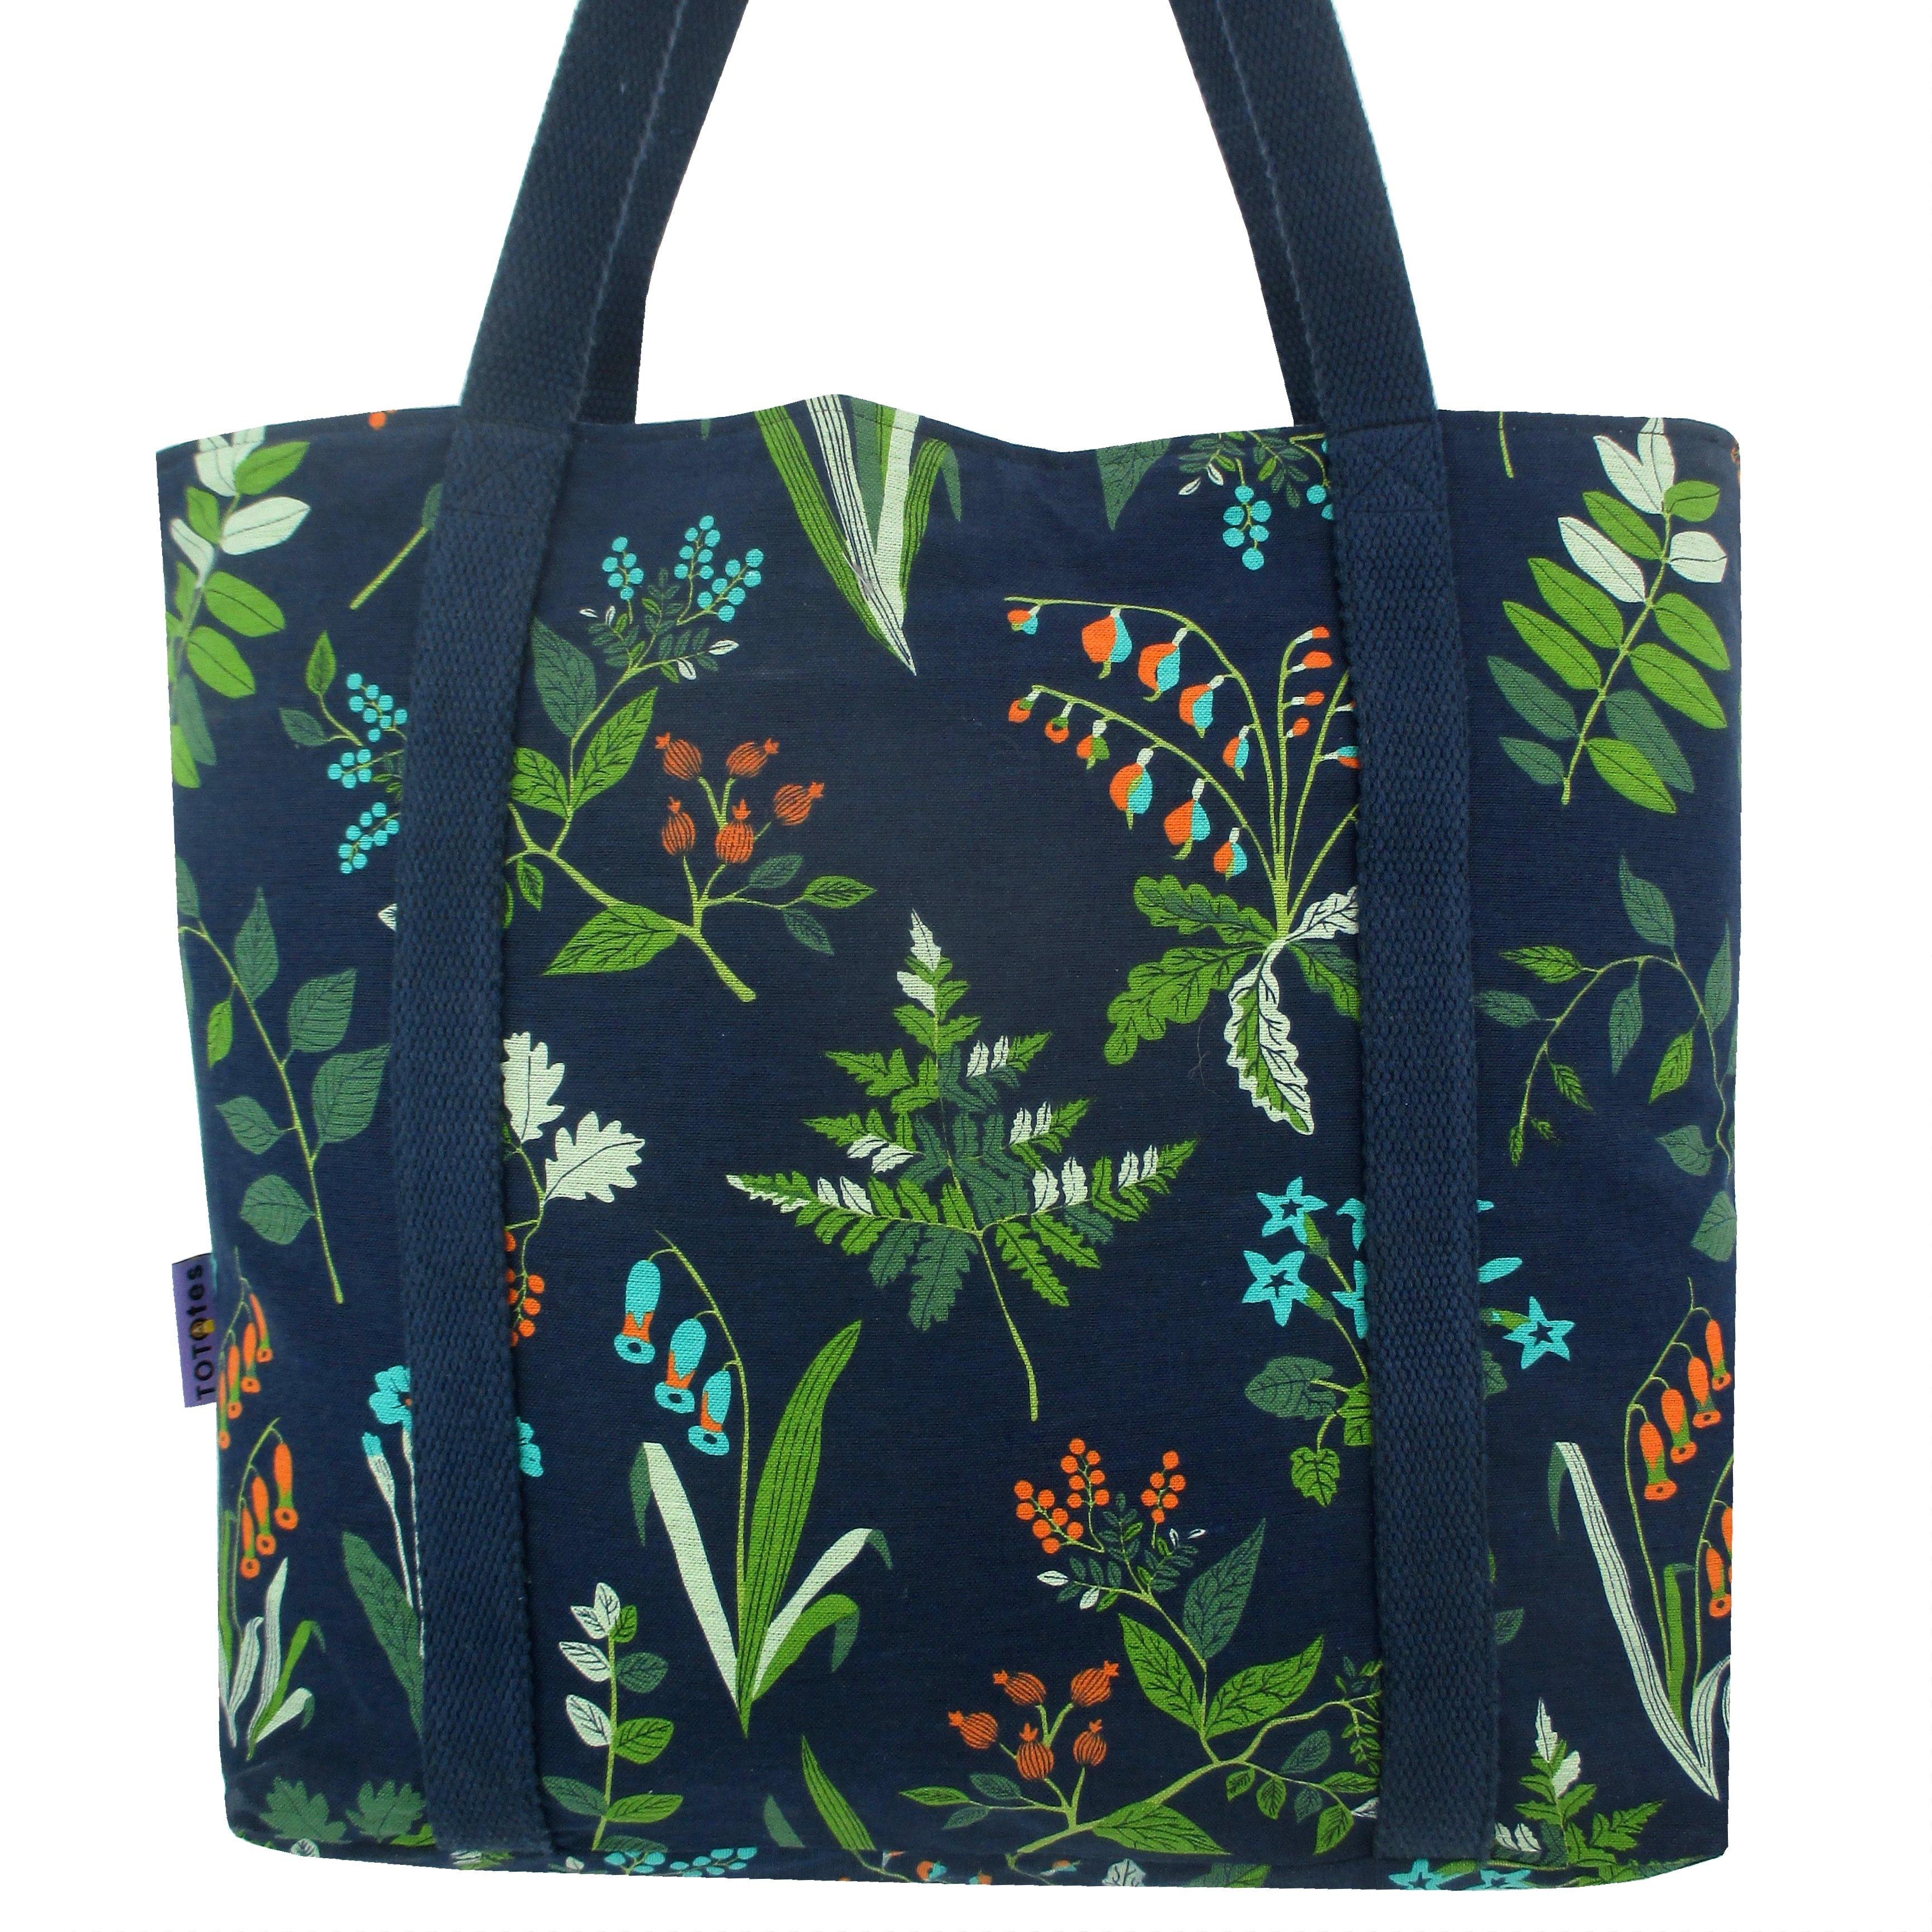 Fun Colorful Large Carry-All Tote Bags for Women in Exciting Animal Prints